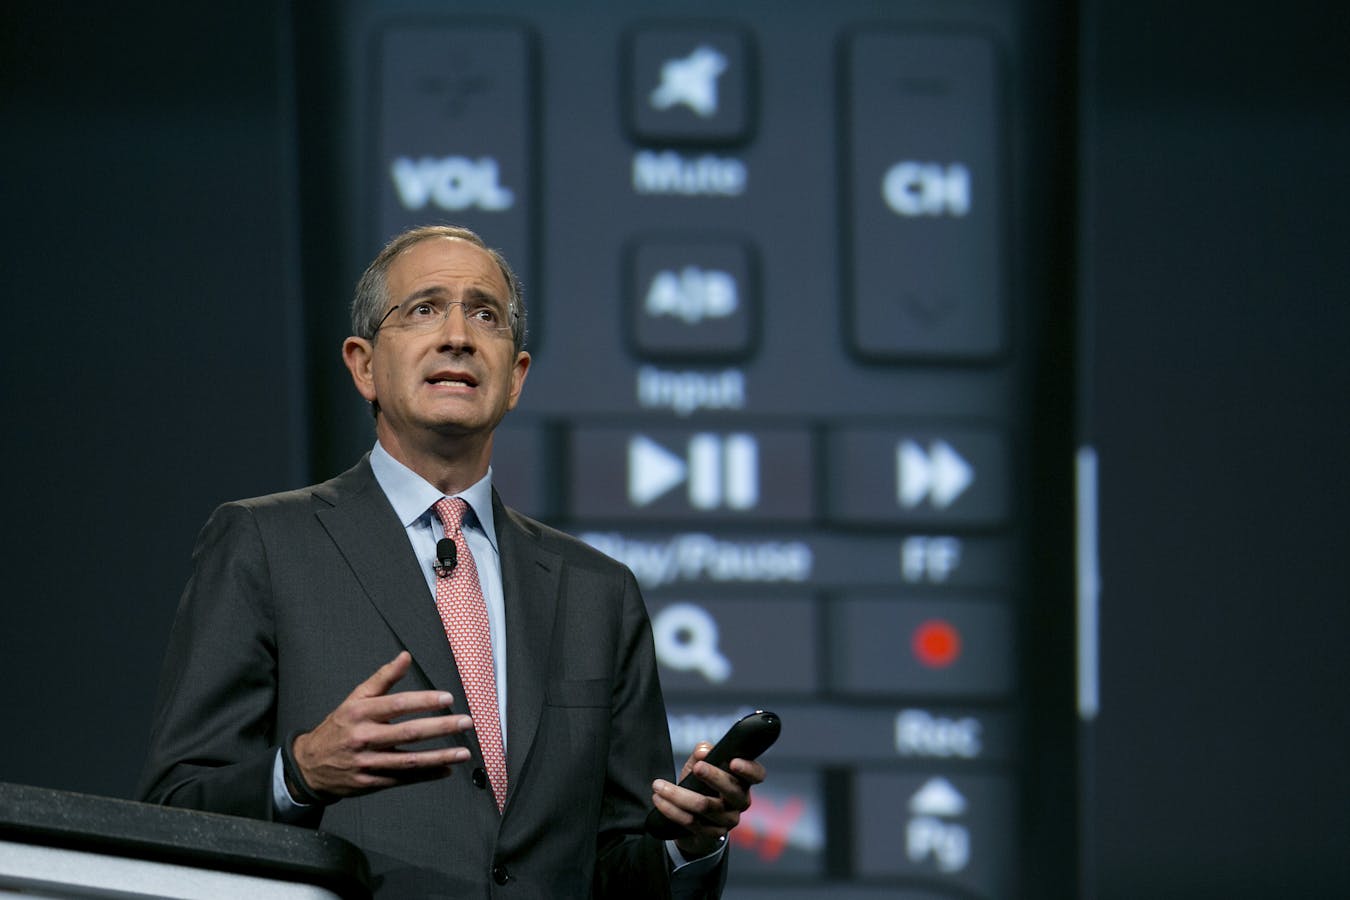 Comcast CEO Brian Roberts. Photo by Bloomberg.